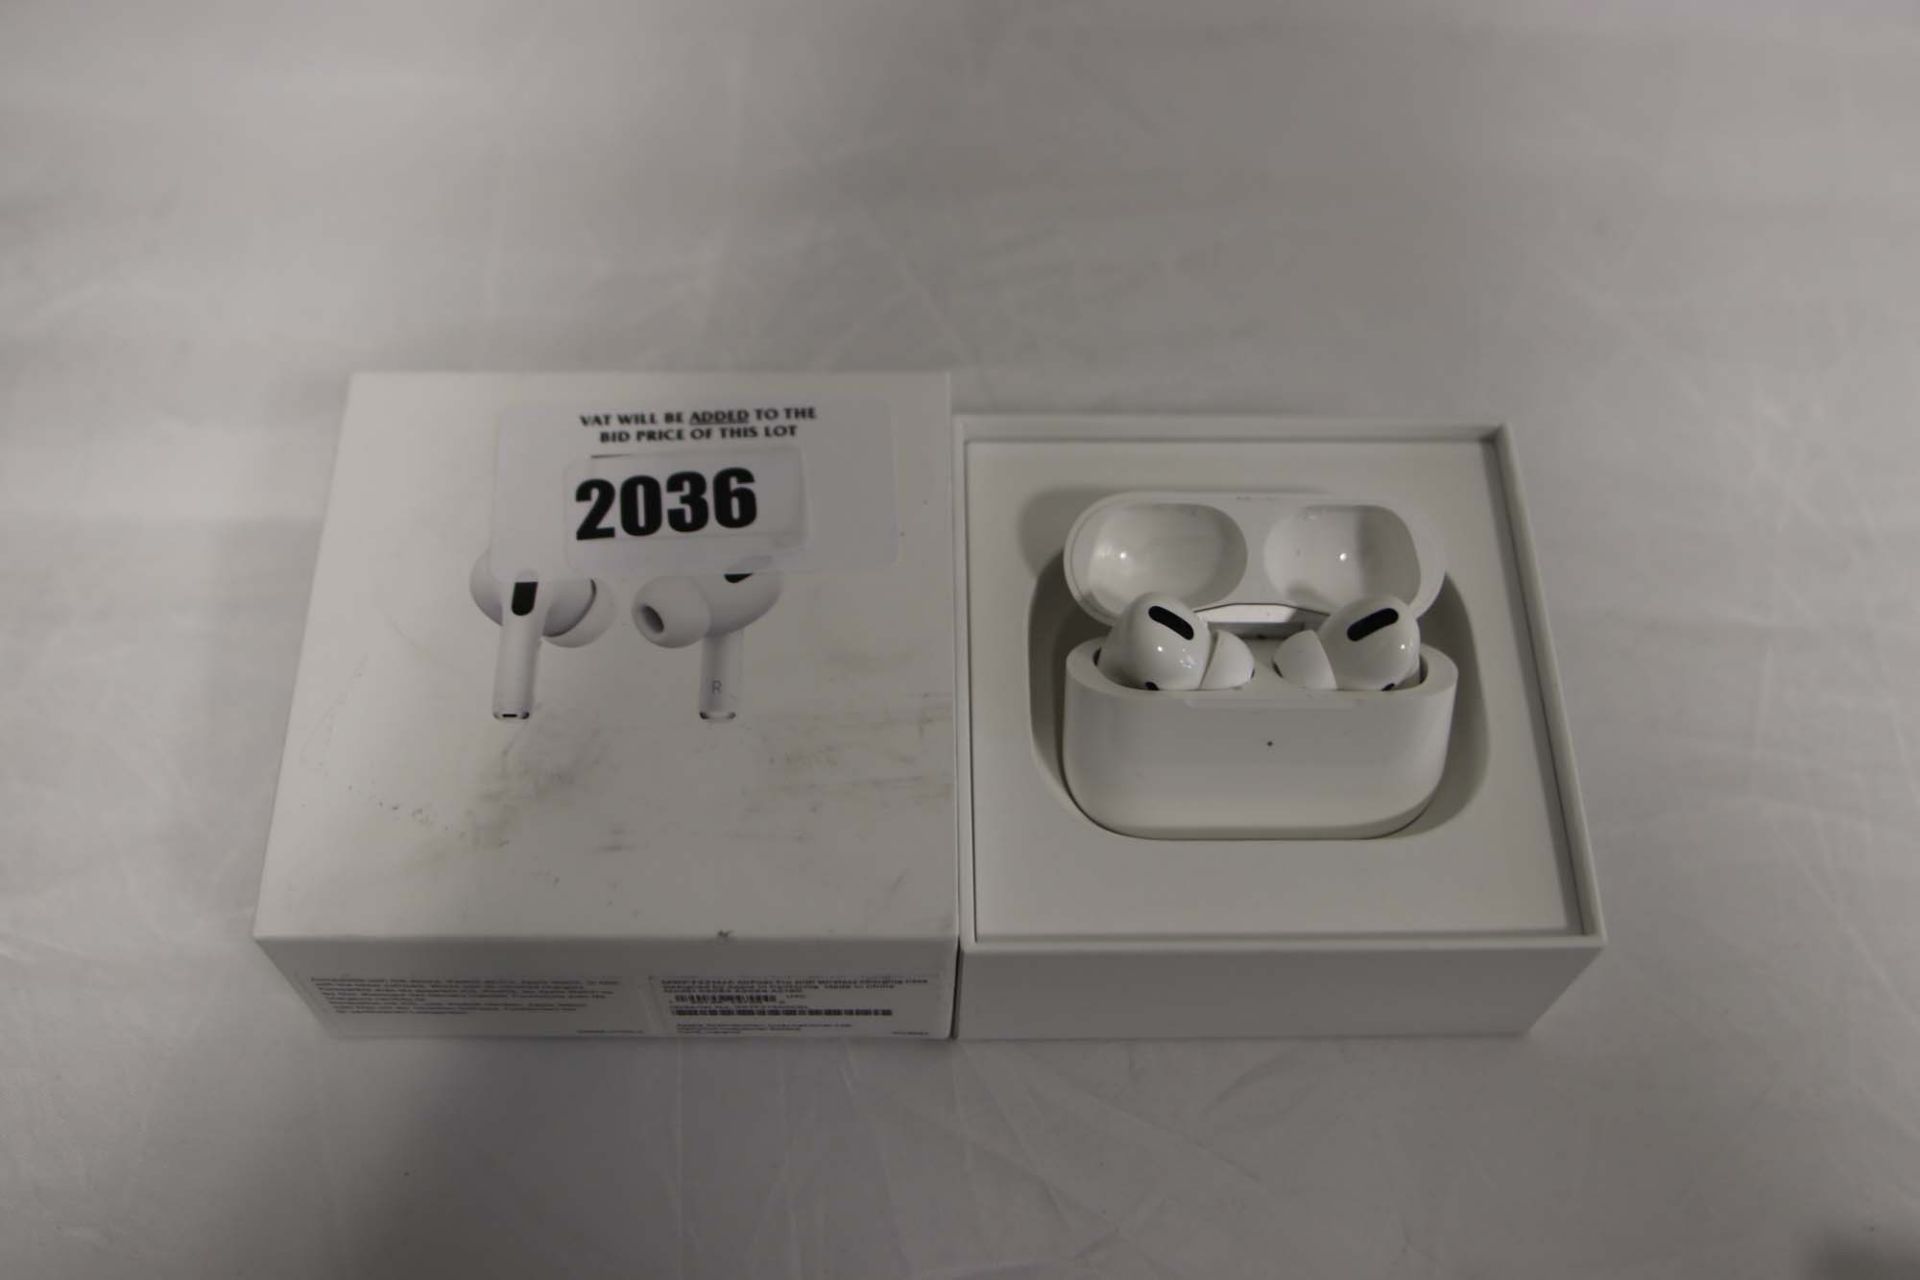 Pair of Apple AirPods Pro